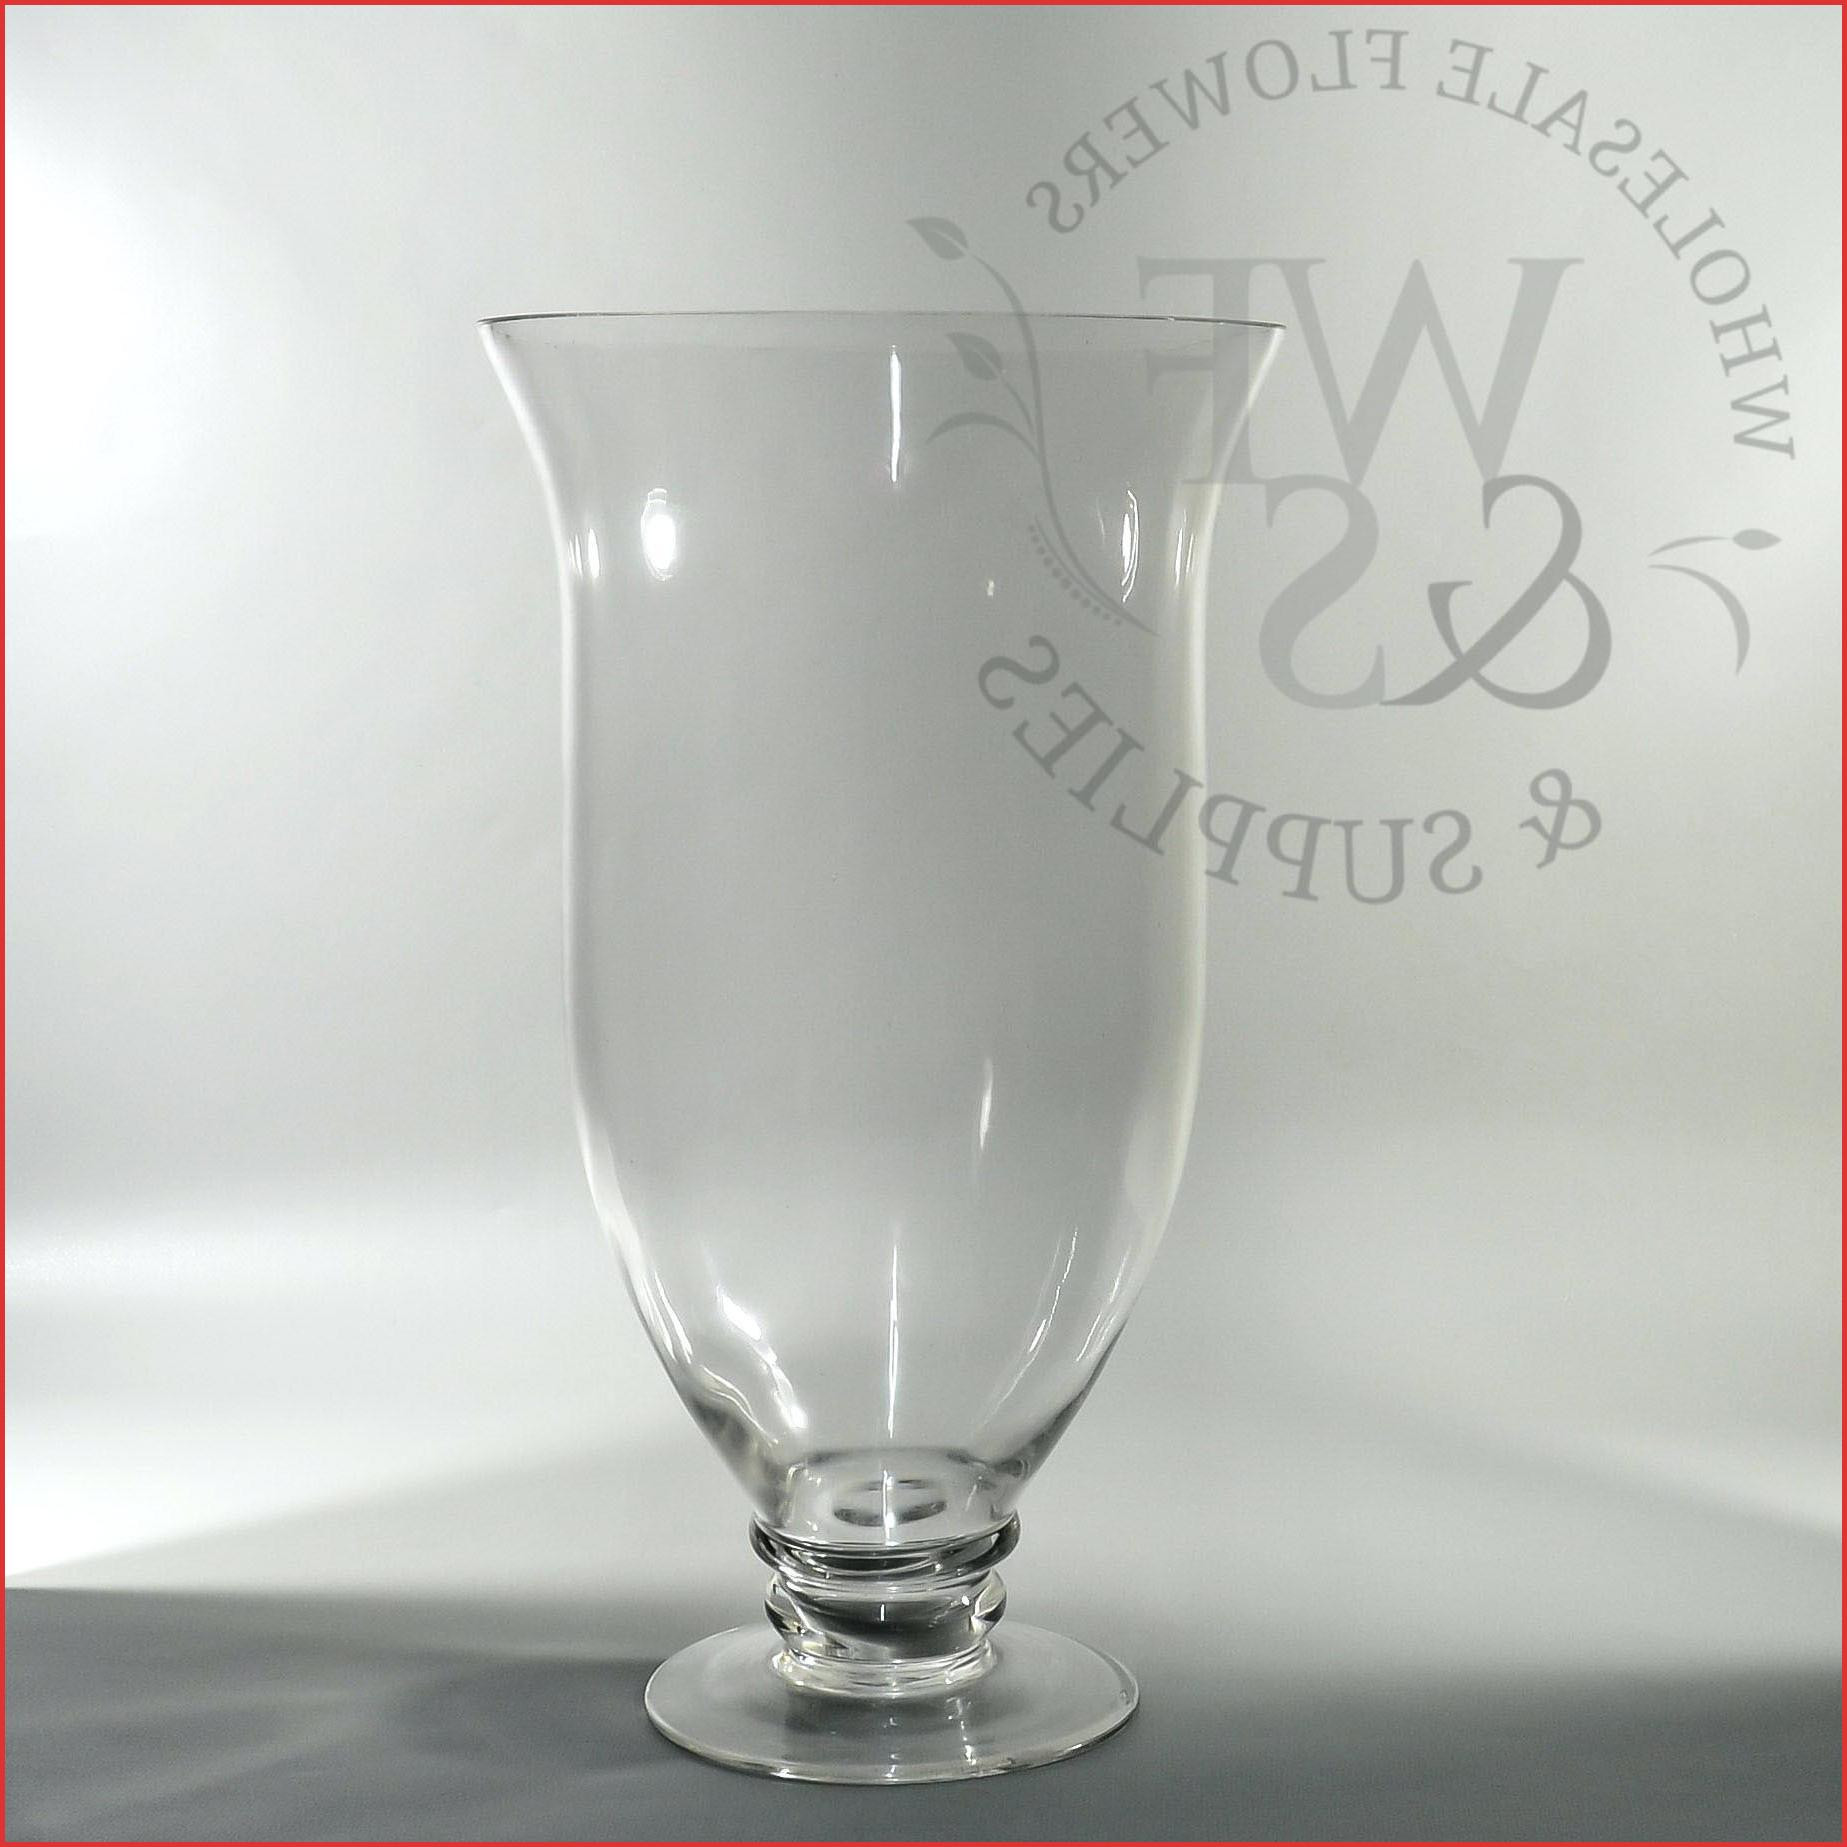 16 Unique Waterford Crystal Vase Price 2024 free download waterford crystal vase price of beautiful cheap wedding vases stringcheesetheory us pertaining to glass vases for cheap wedding vases awesome sunflower wedding invitations from cheap wedding